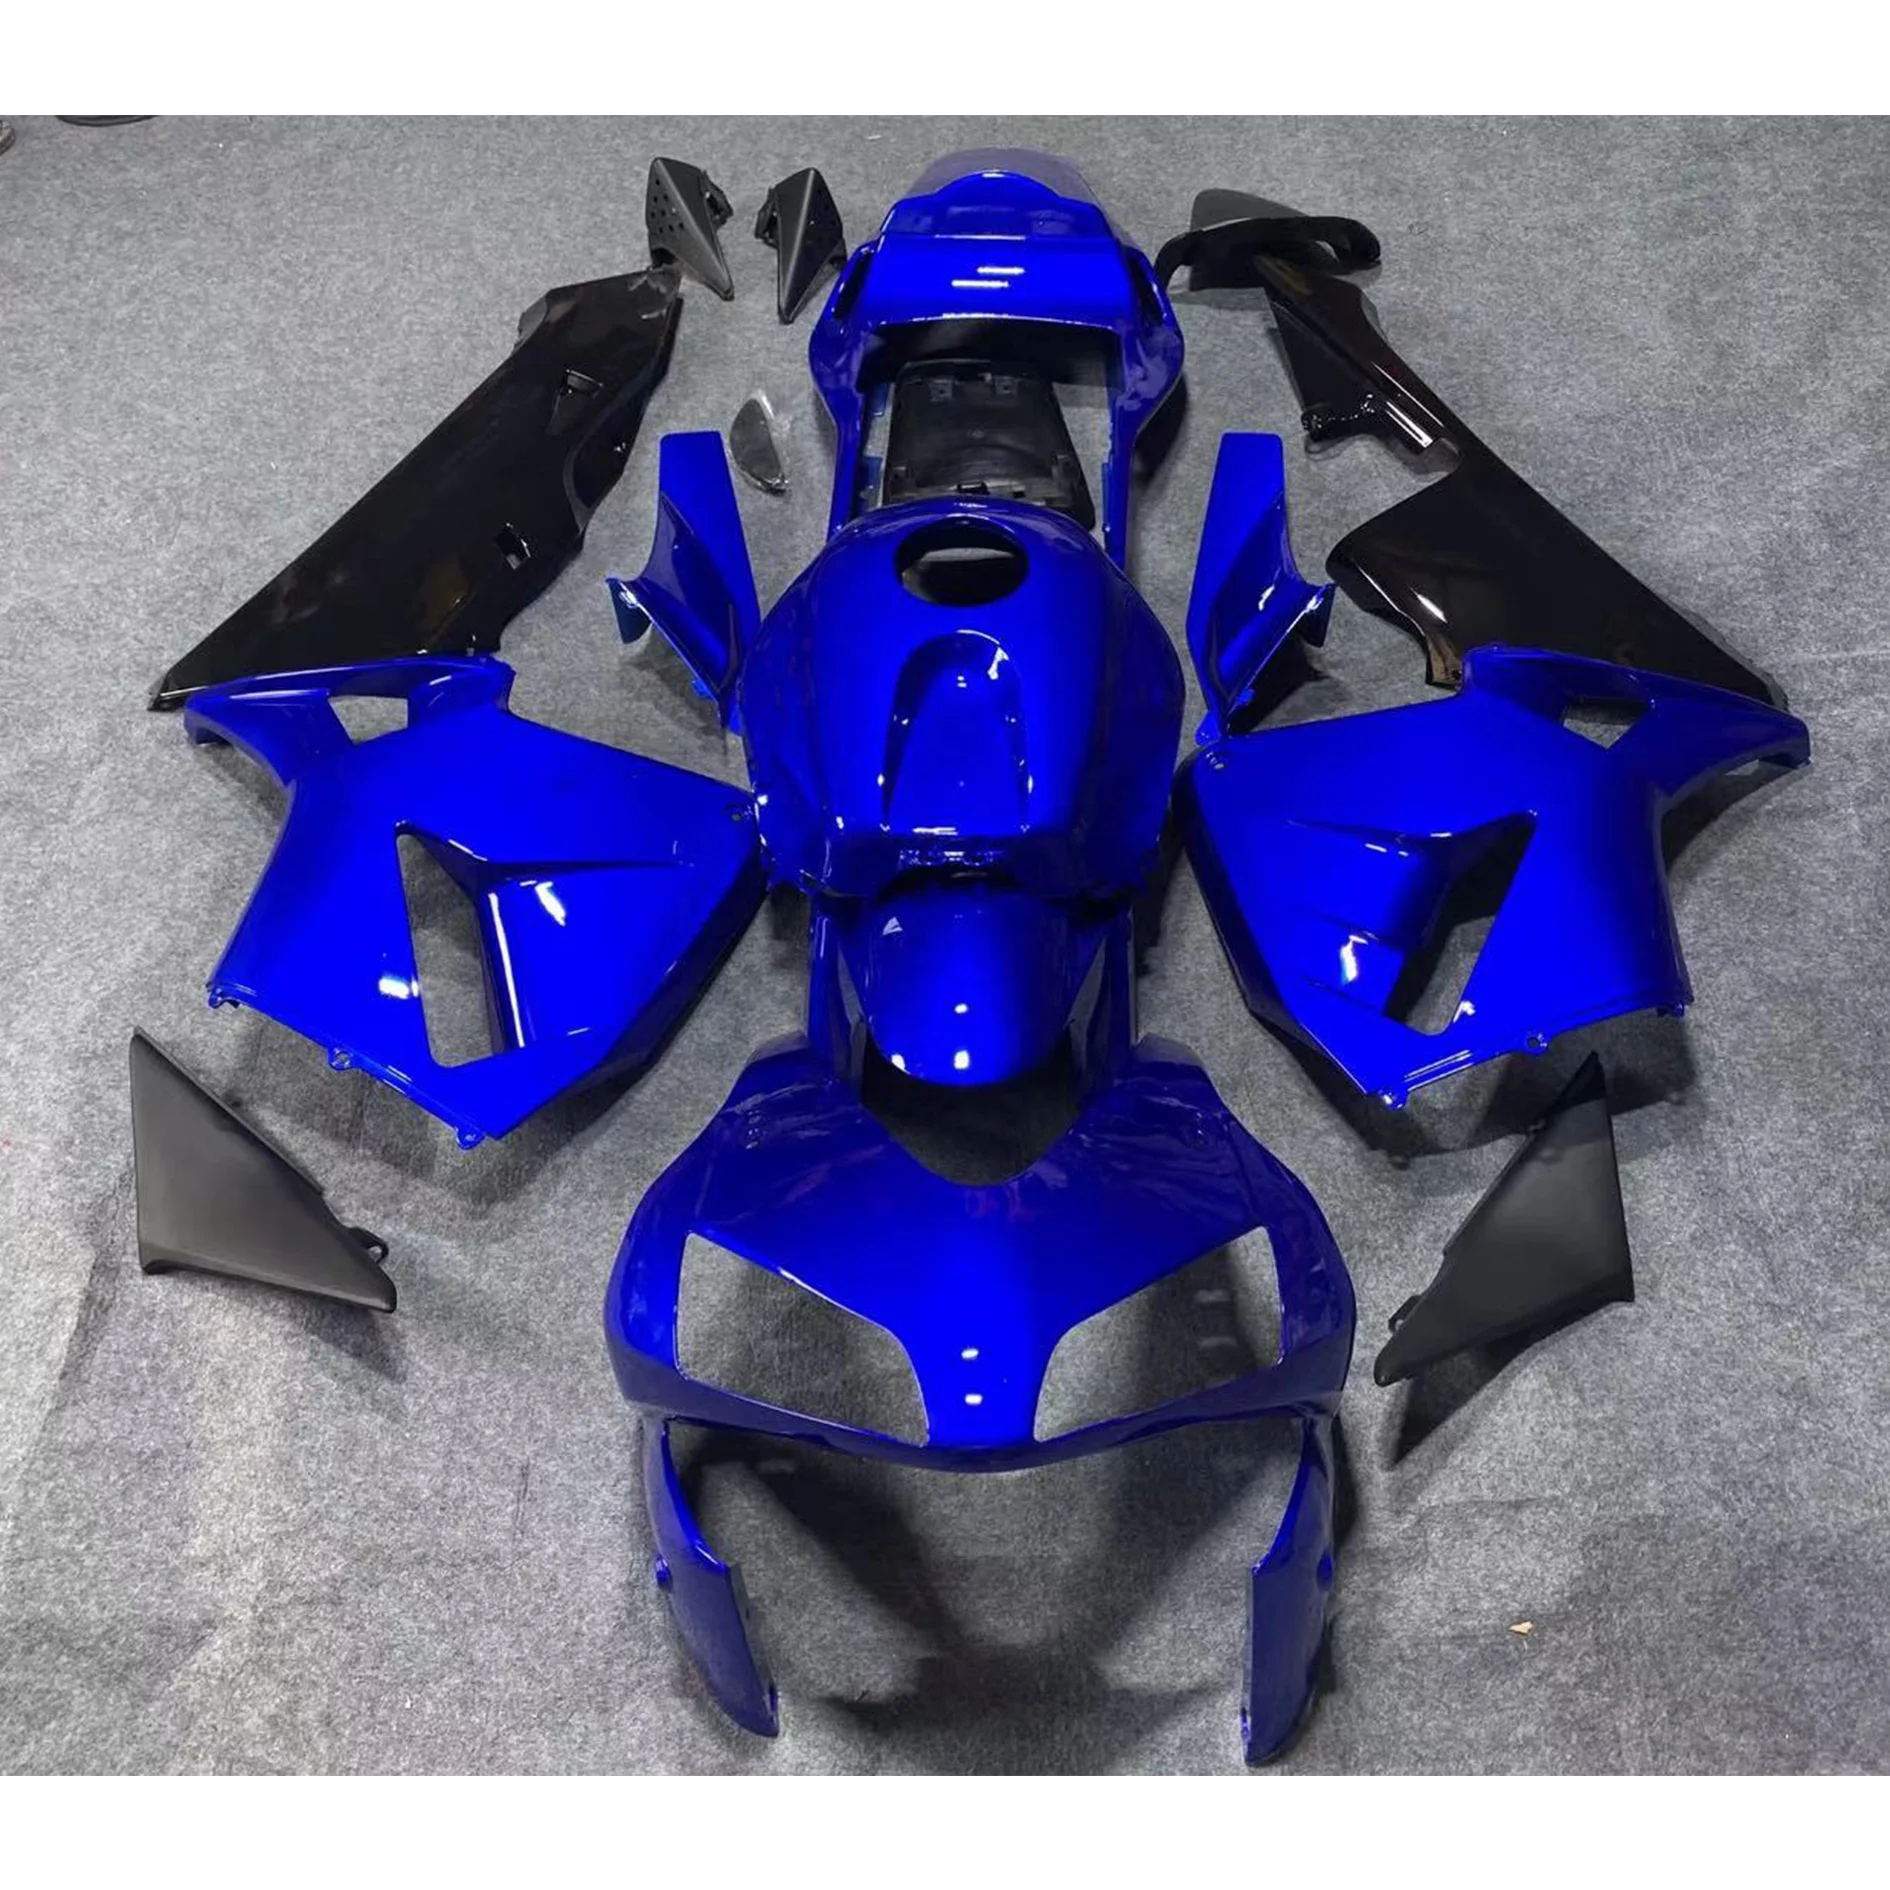 

2022 WHSC Blue Black OEM Motorcycle Accessories For HONDA CBR600 RR 2003-2004 03 04 Motorcycle Body Systems Fairing Kits, Pictures shown